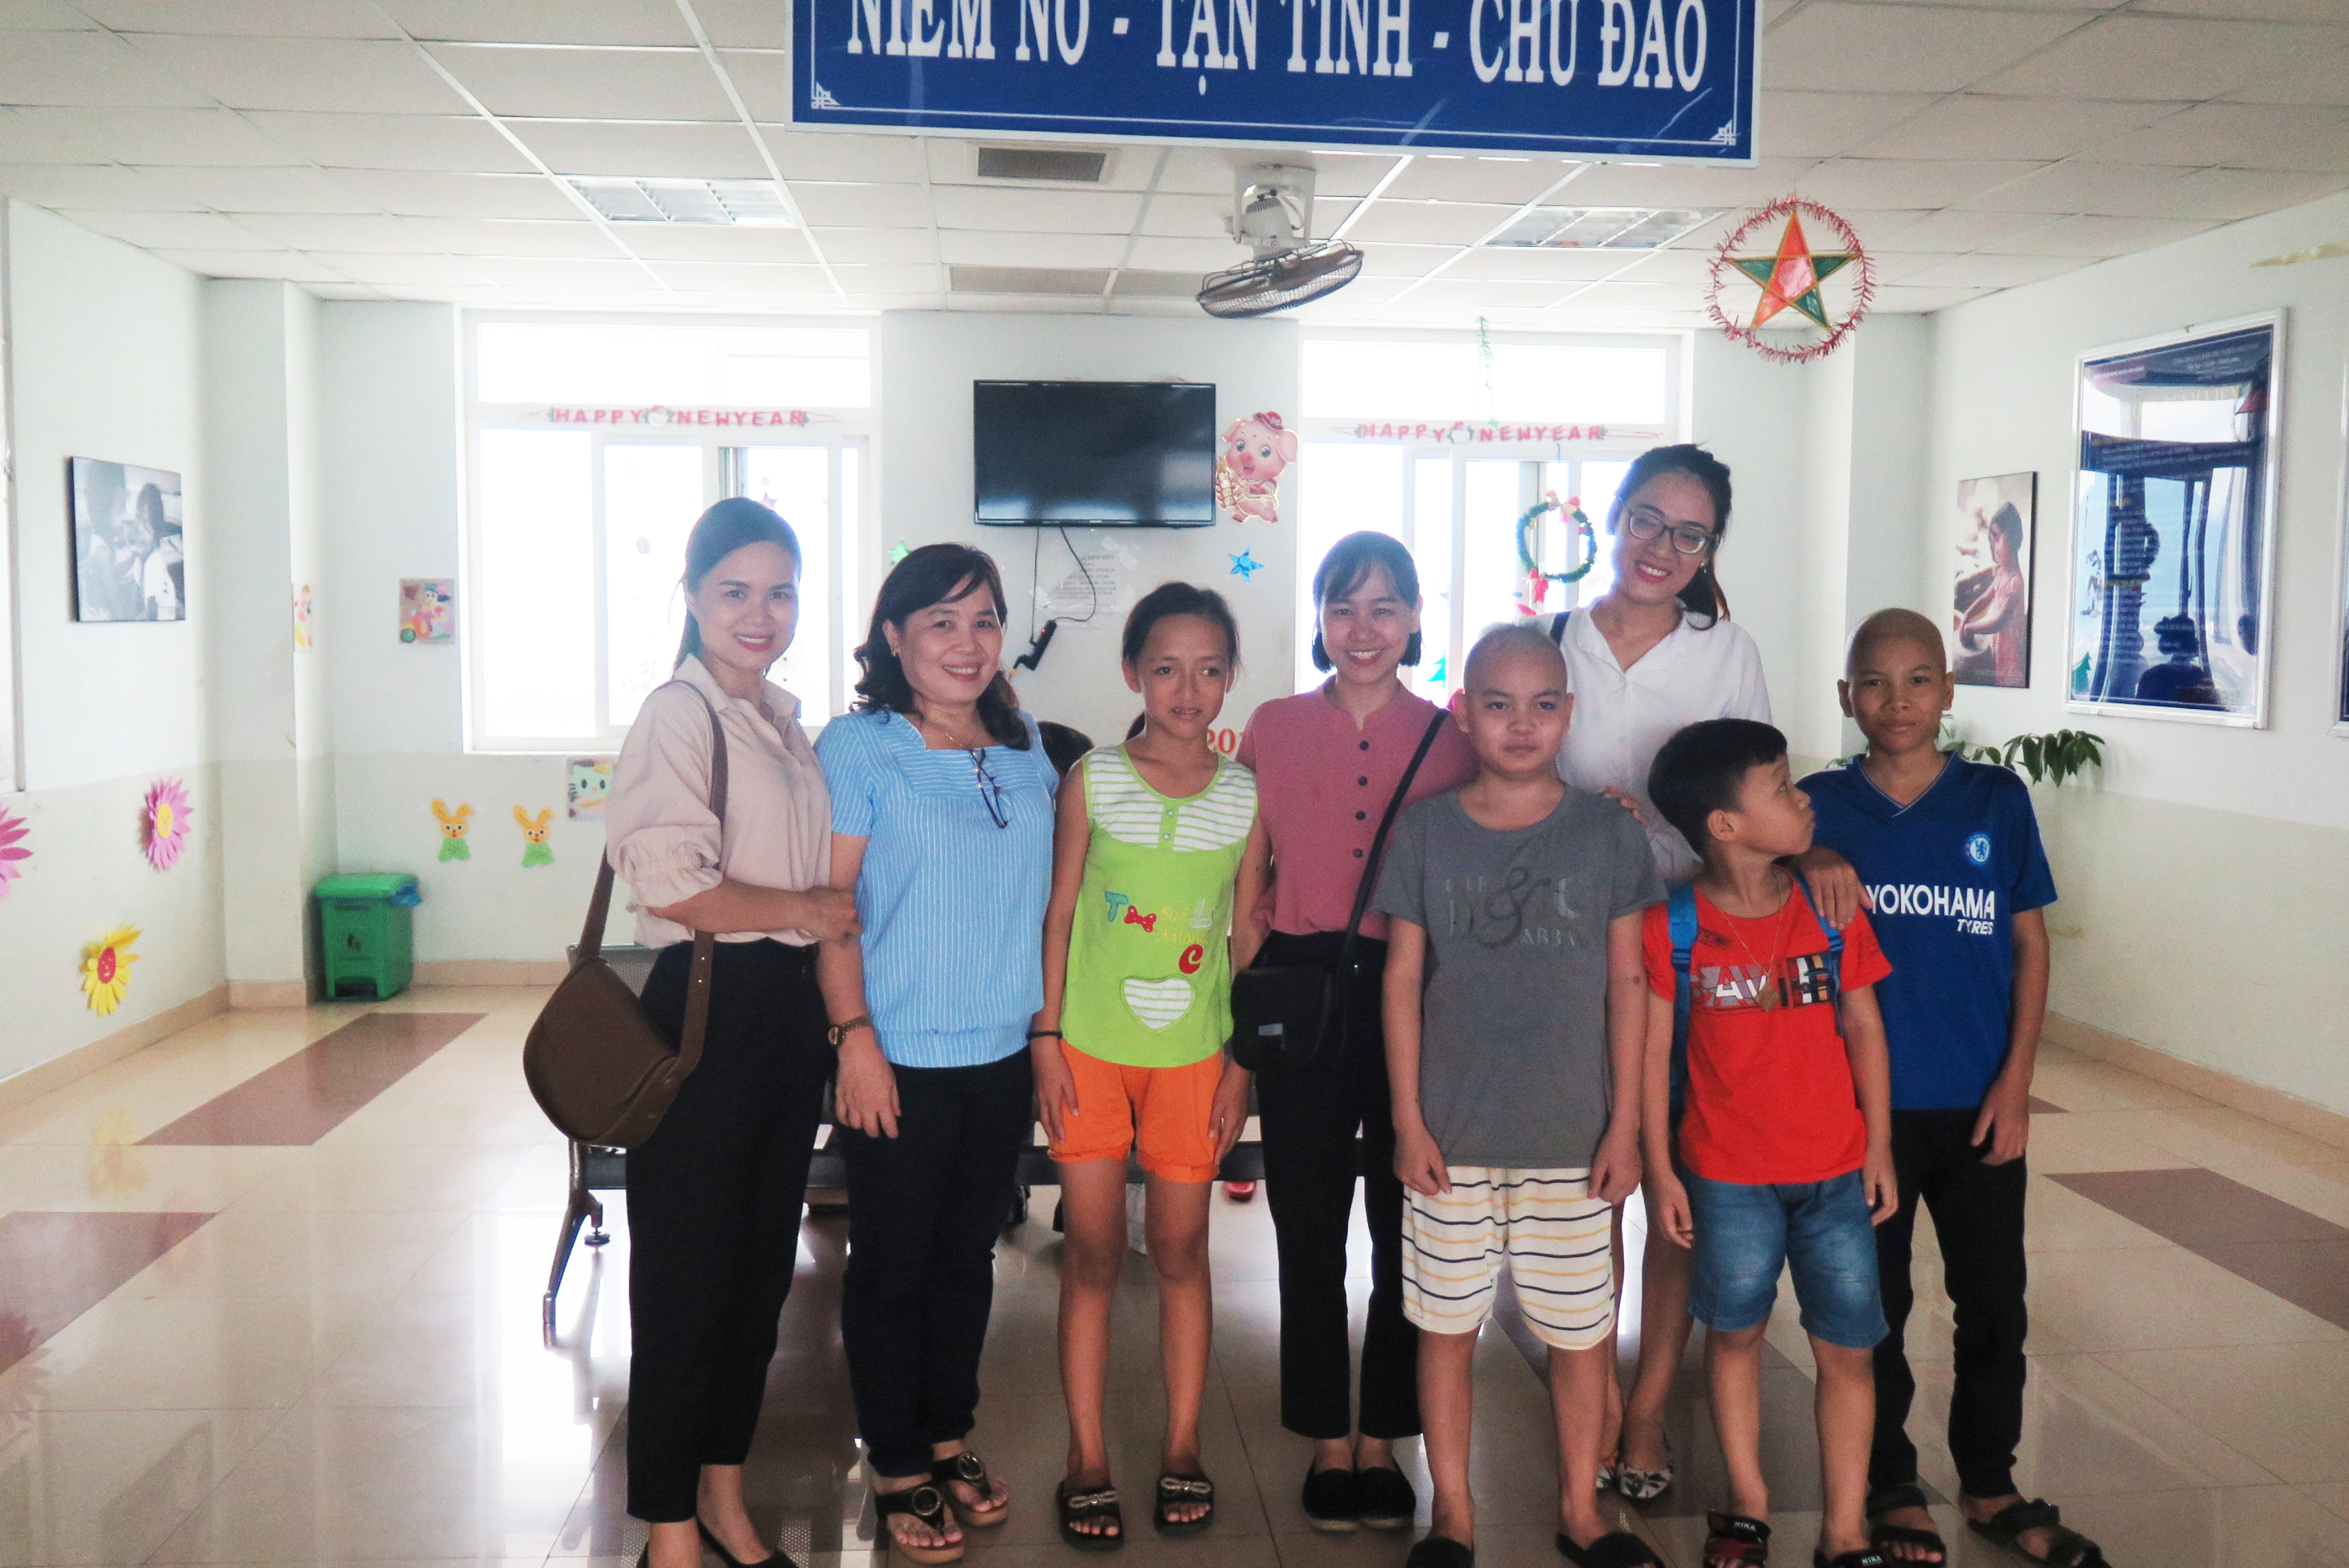 Danapha visited children treated in Danang Oncology Hospital